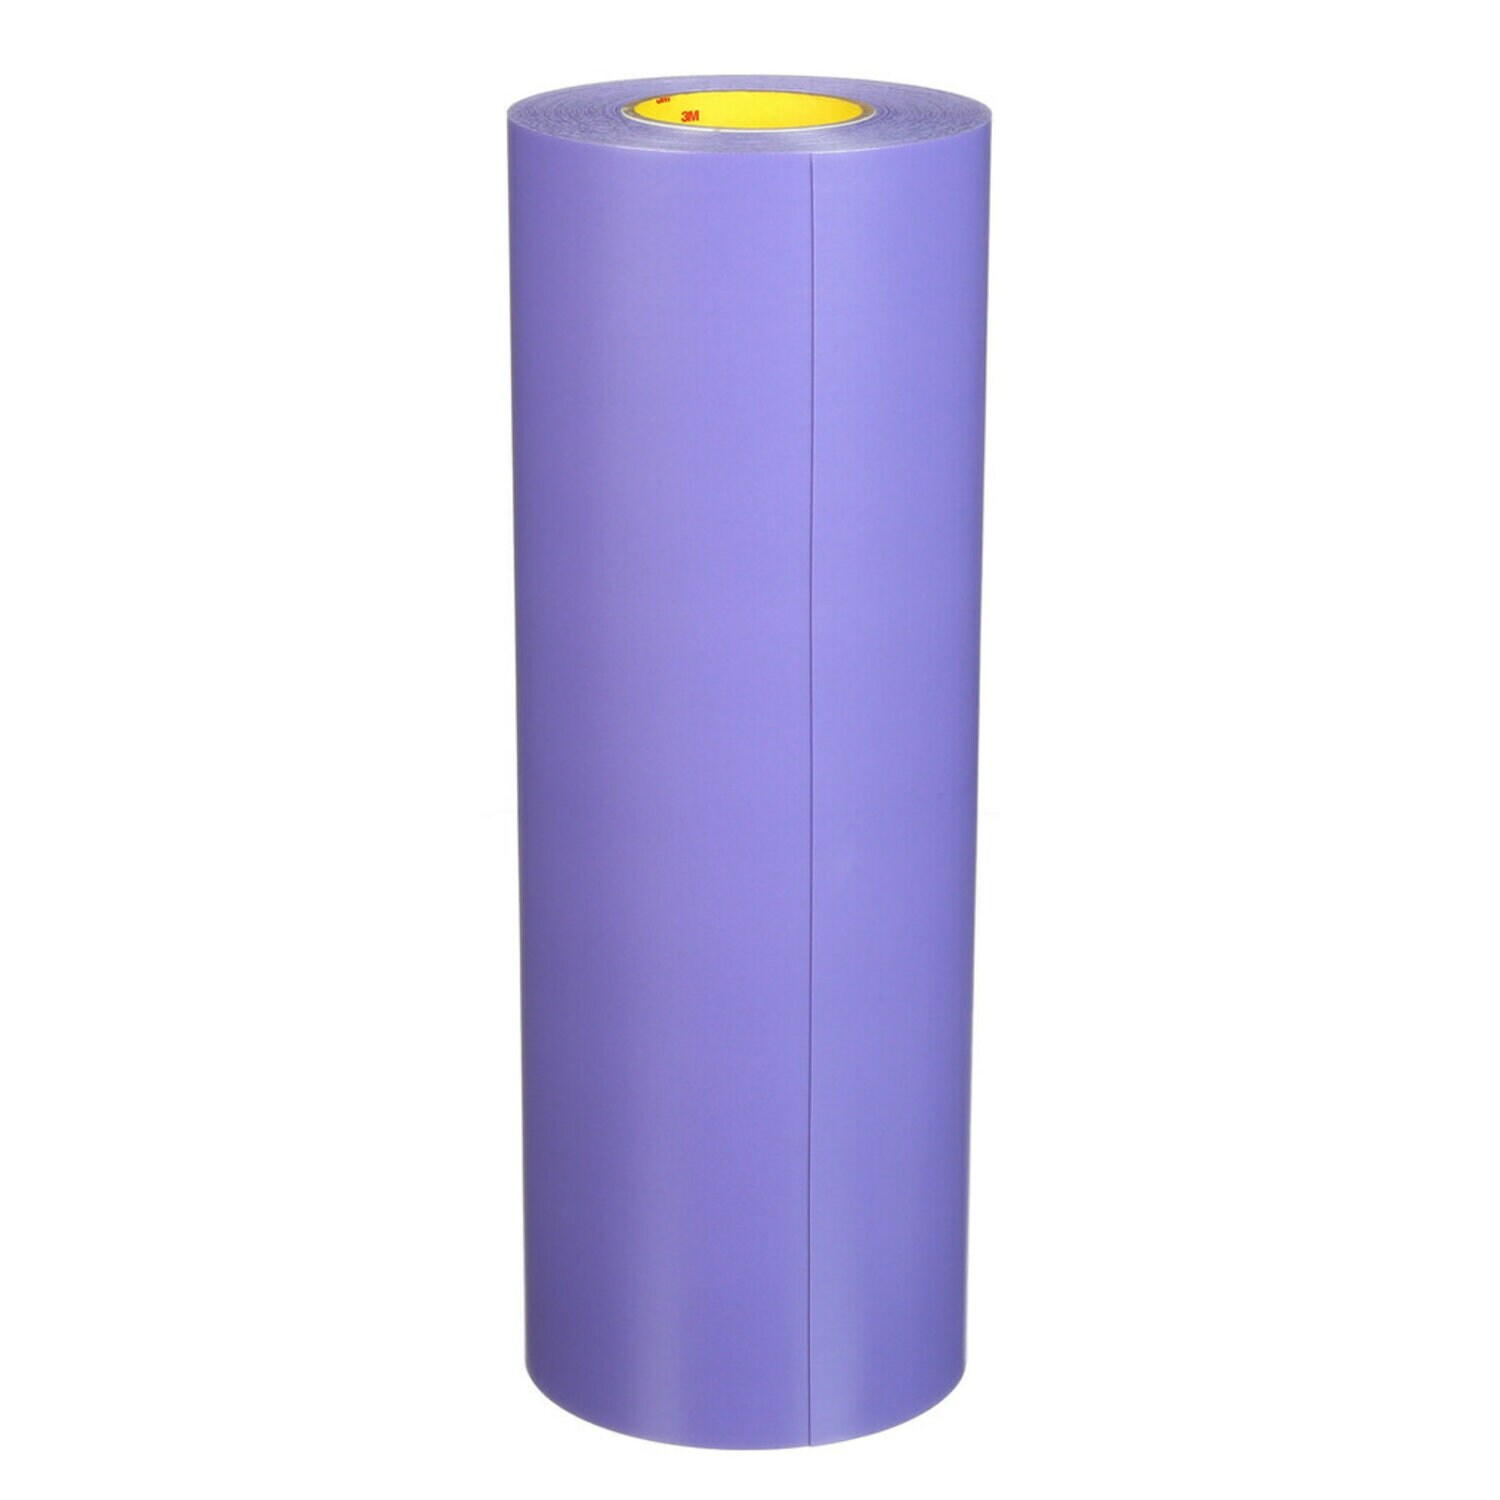 7000047431 - 3M Cushion-Mount Plus Plate Mounting Tape E1515H, Purple, 18 in x 25
yd, 15 mil, 1 roll per case